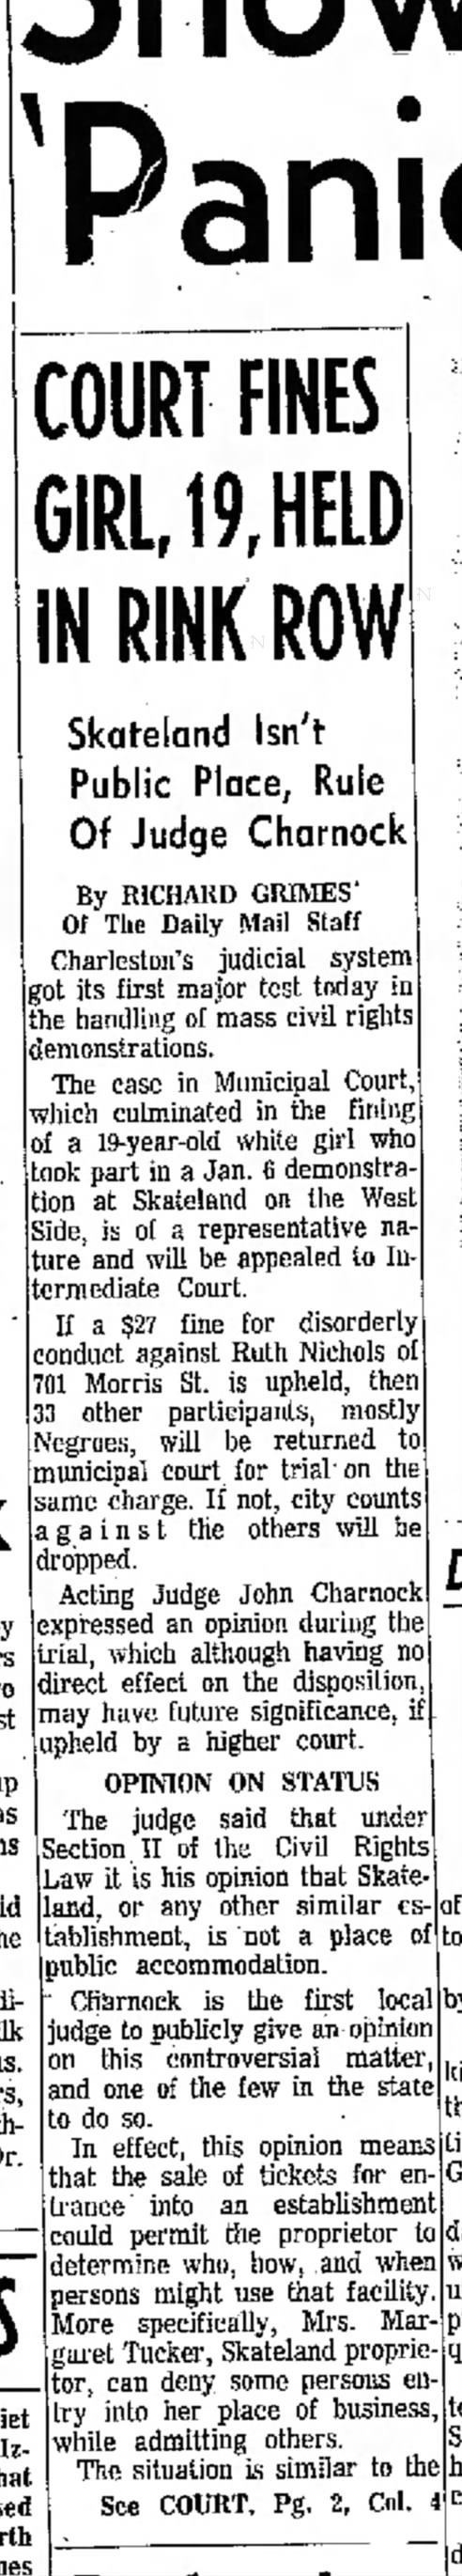 Court Fines Girl, 19, Held In Rink Row